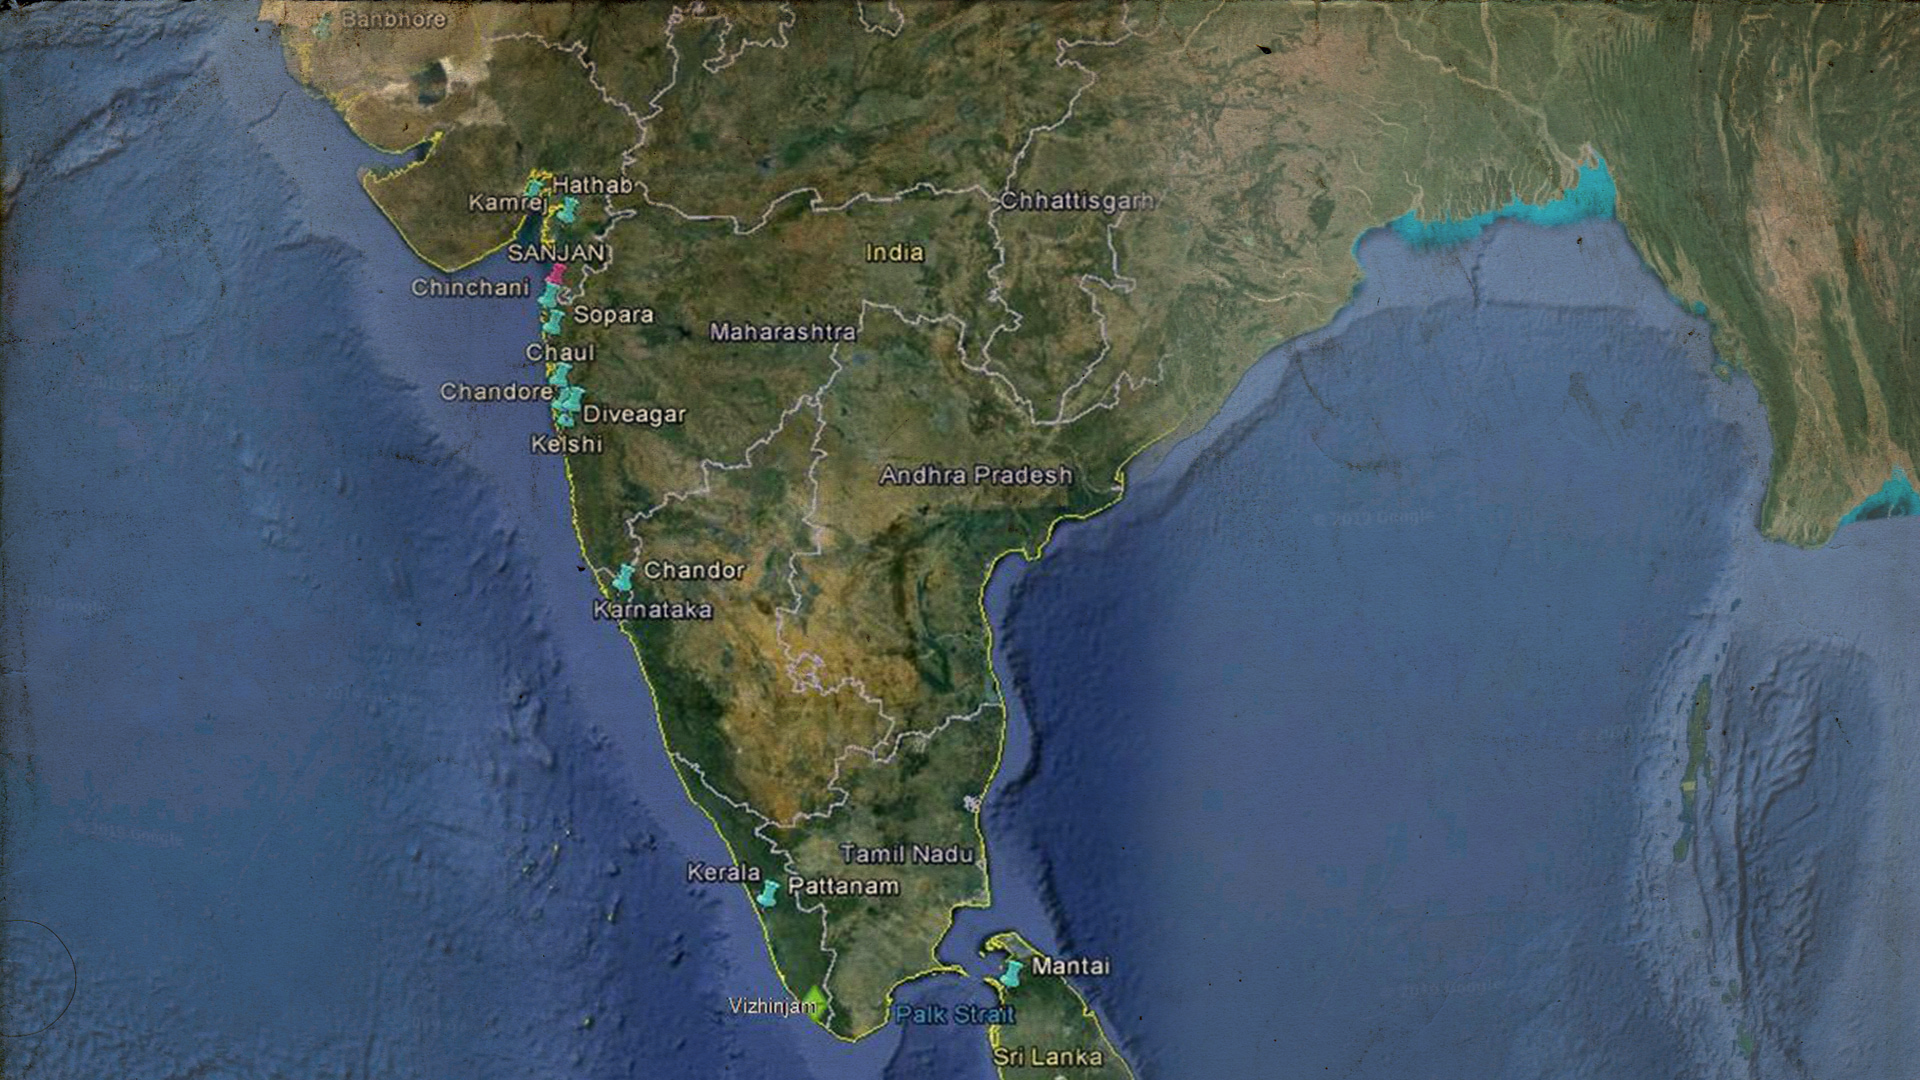 Medieval India sites on the western coast of South Asia